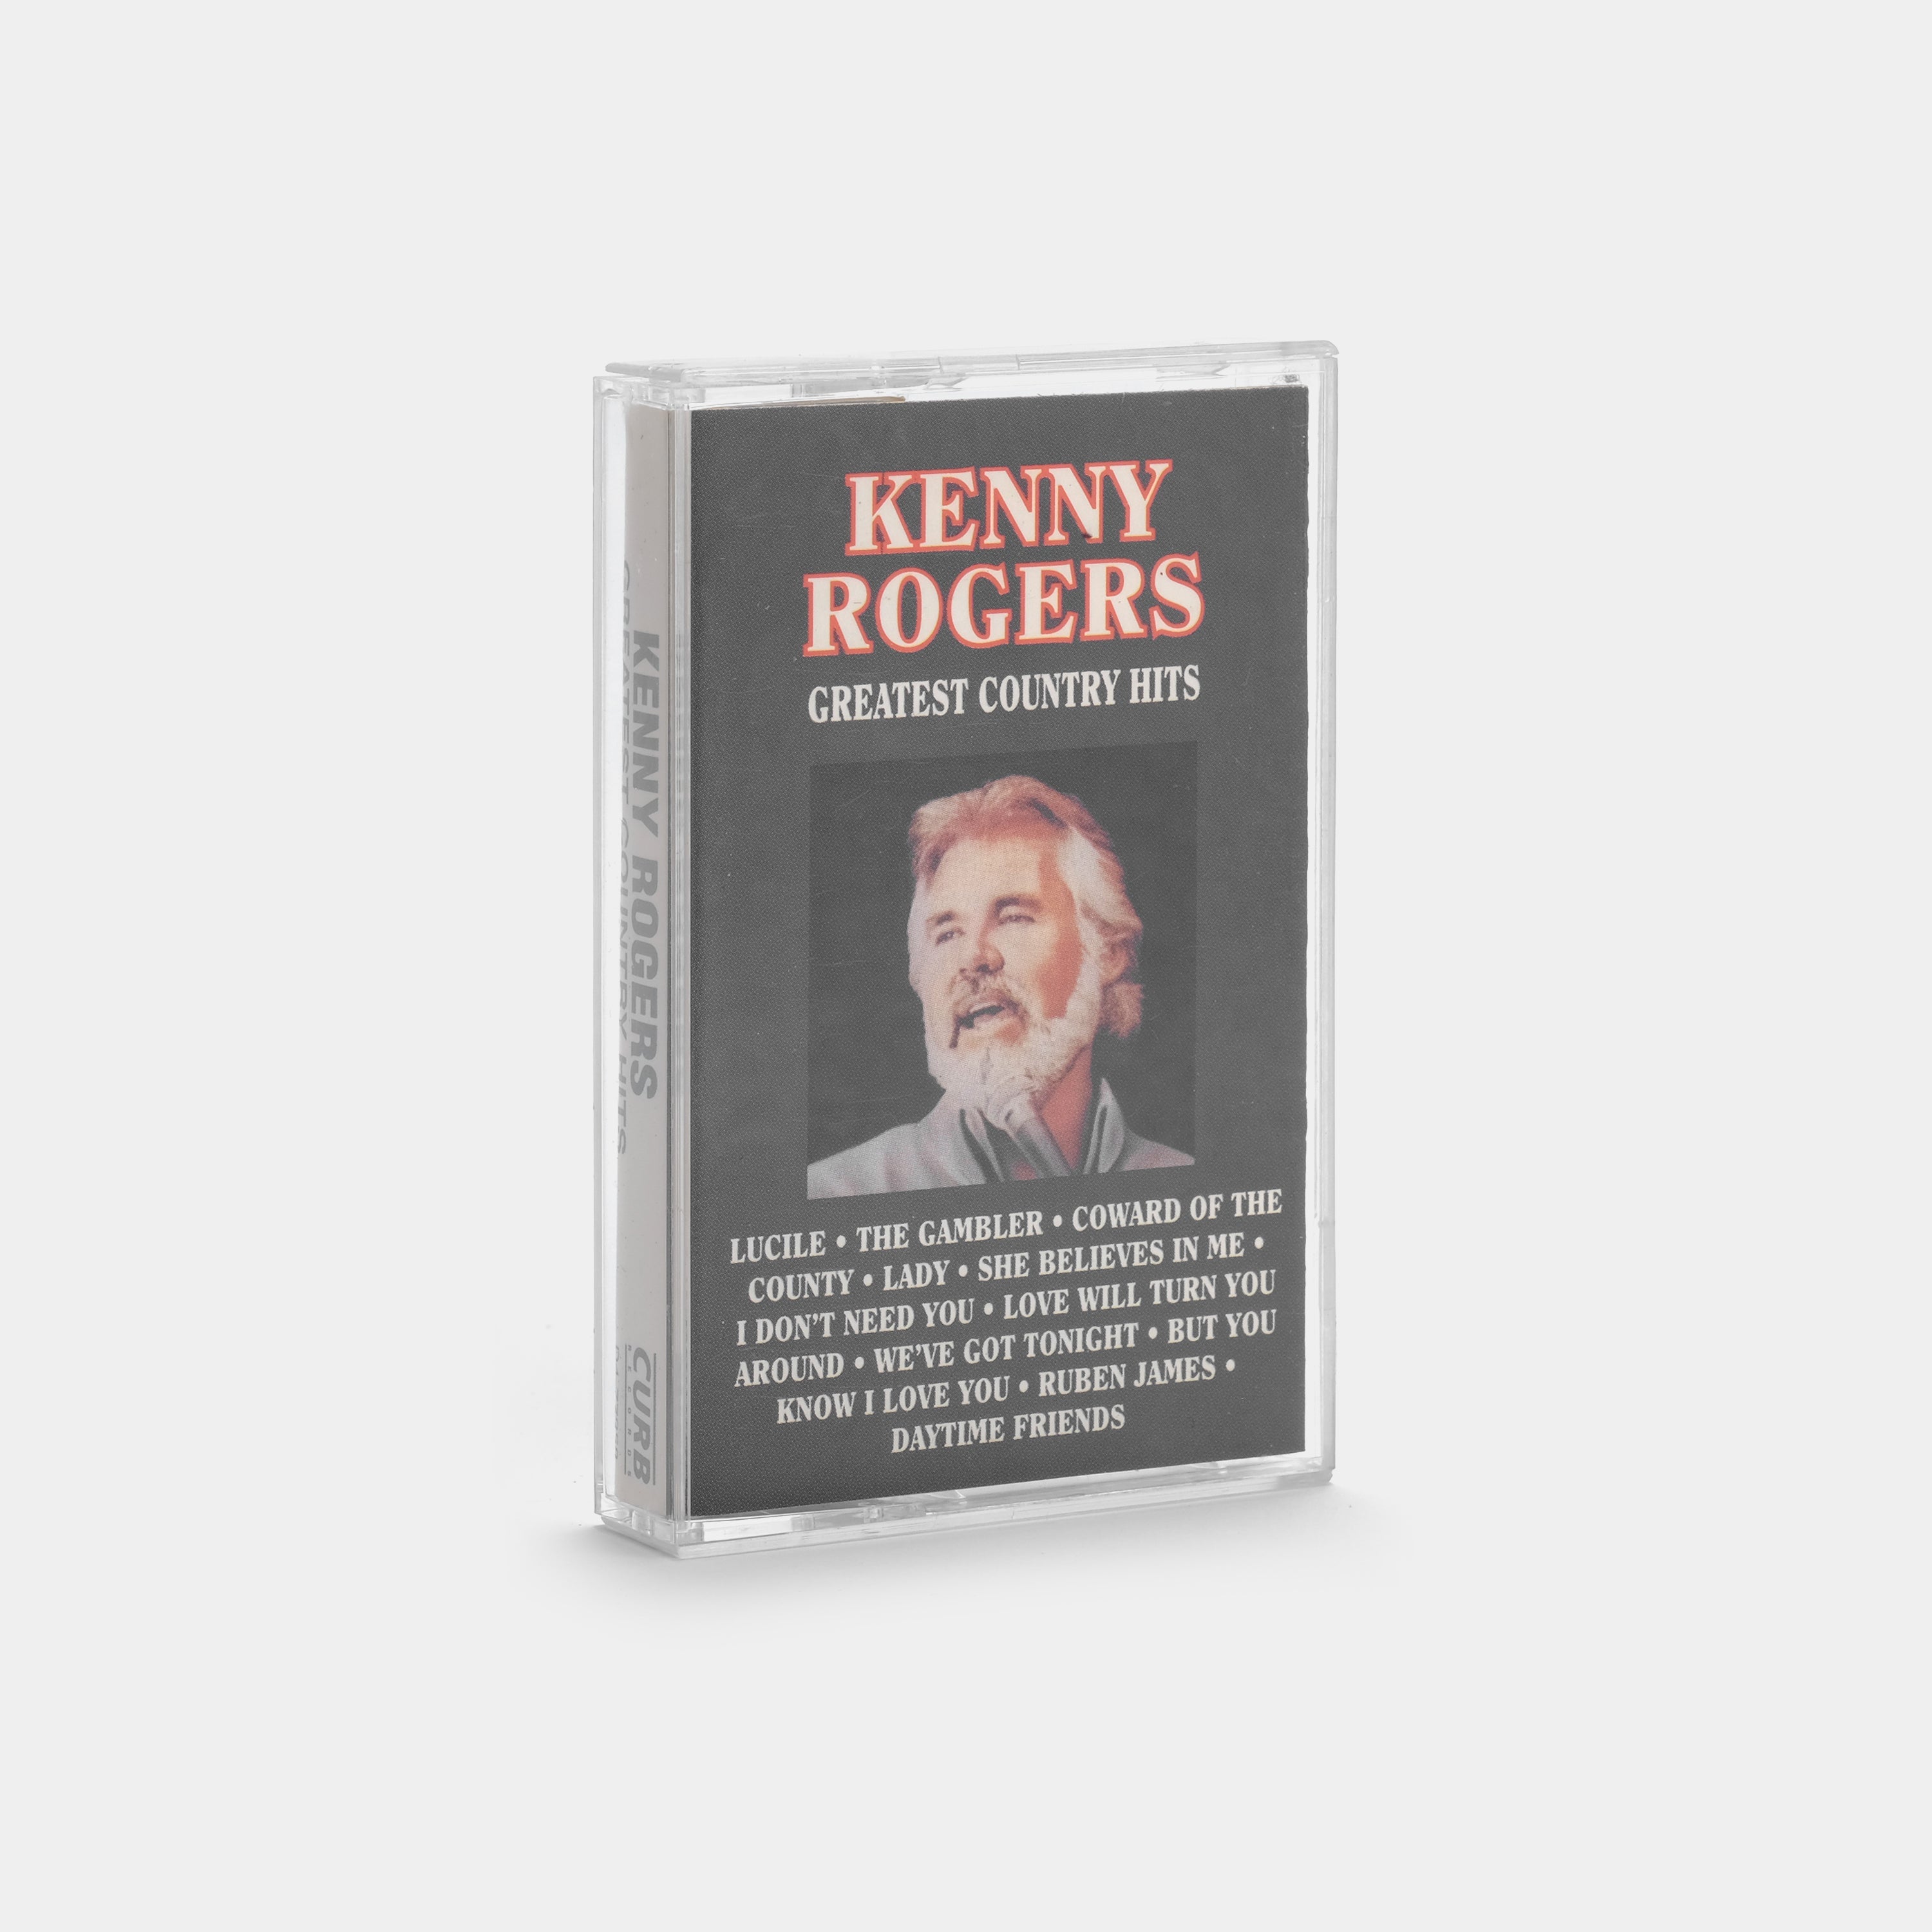 Kenny Rogers - Greatest Country Hits Cassette Tape